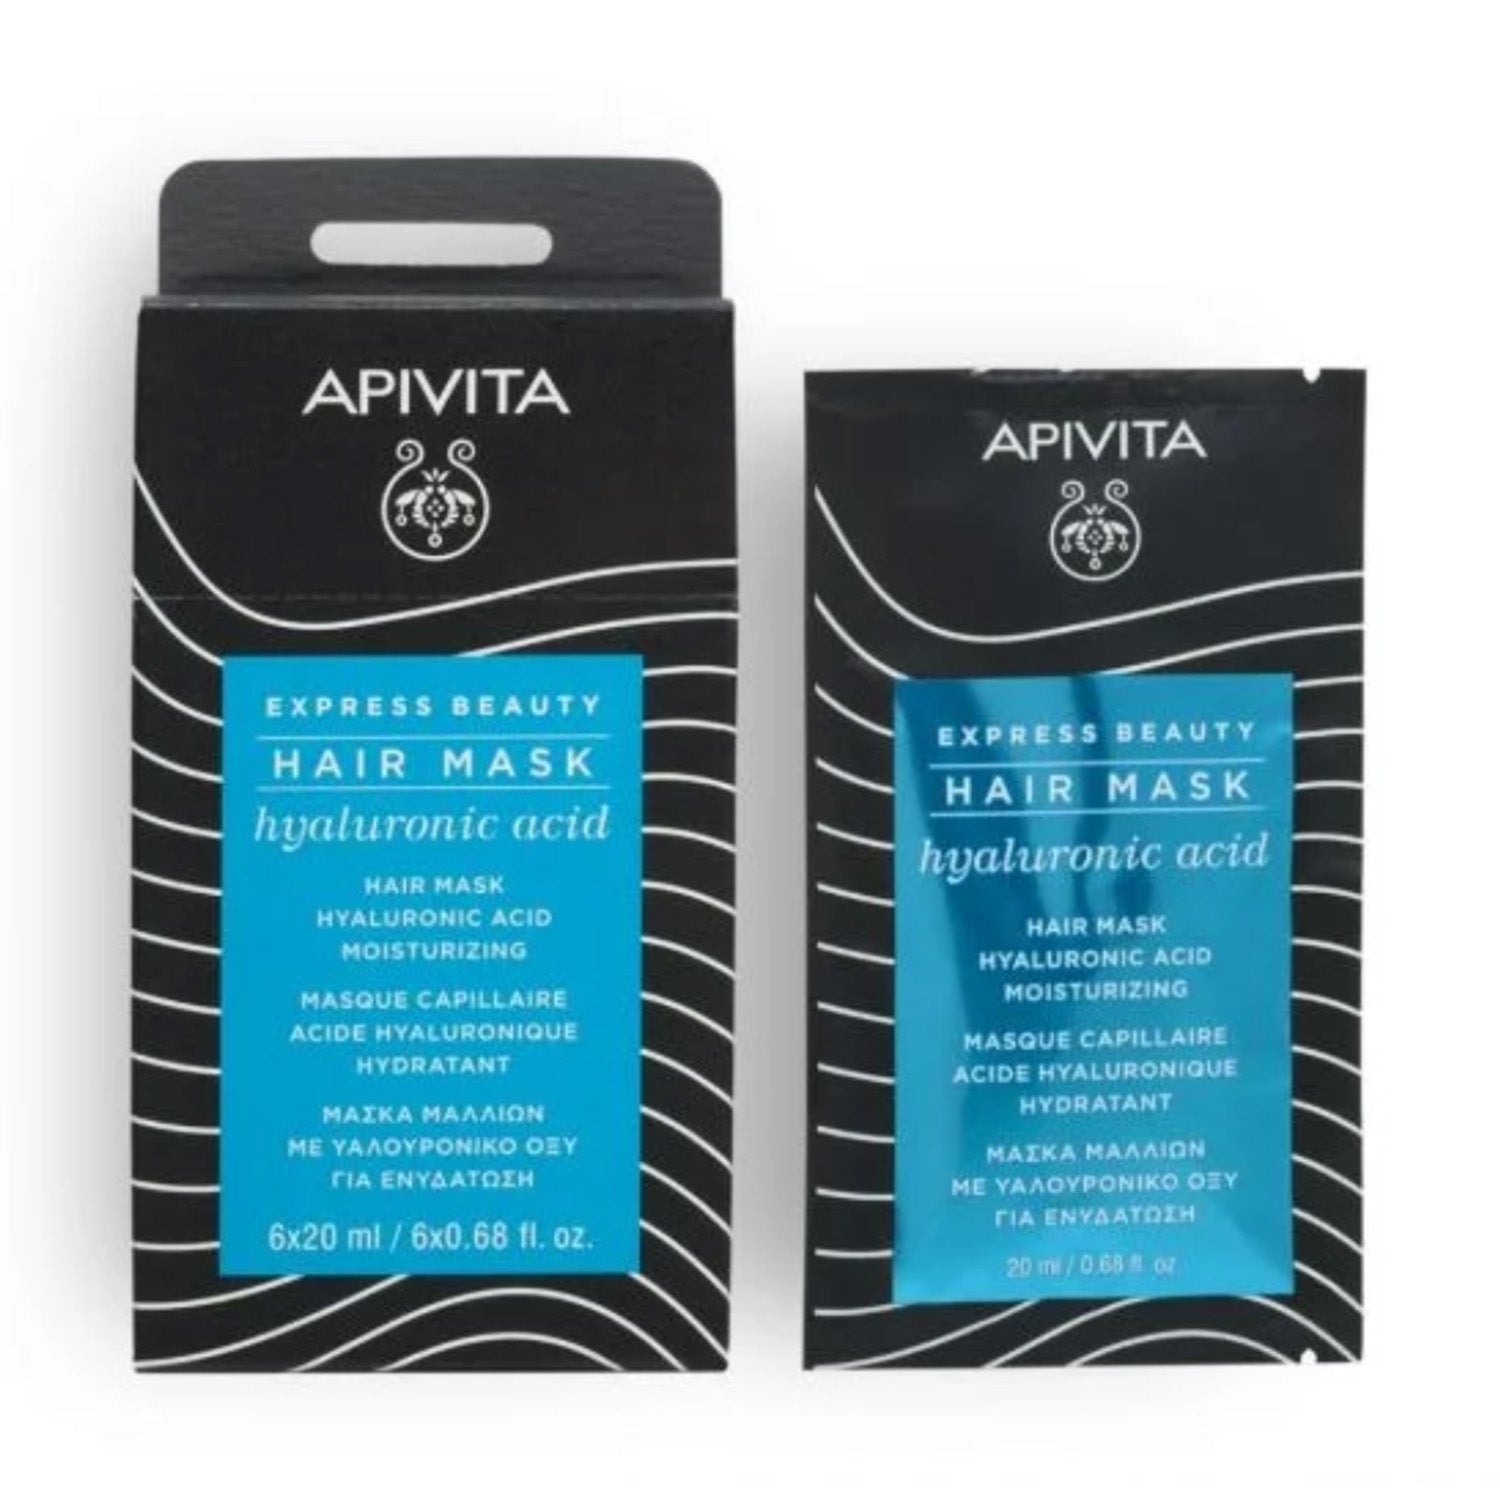 Apivita Moisturising Hair Mask Express Beauty is formulated with 97% natural ingredients, such as hyaluronic acid, aloe, thyme honey and oat proteins, to intensely hydrate the hair. 